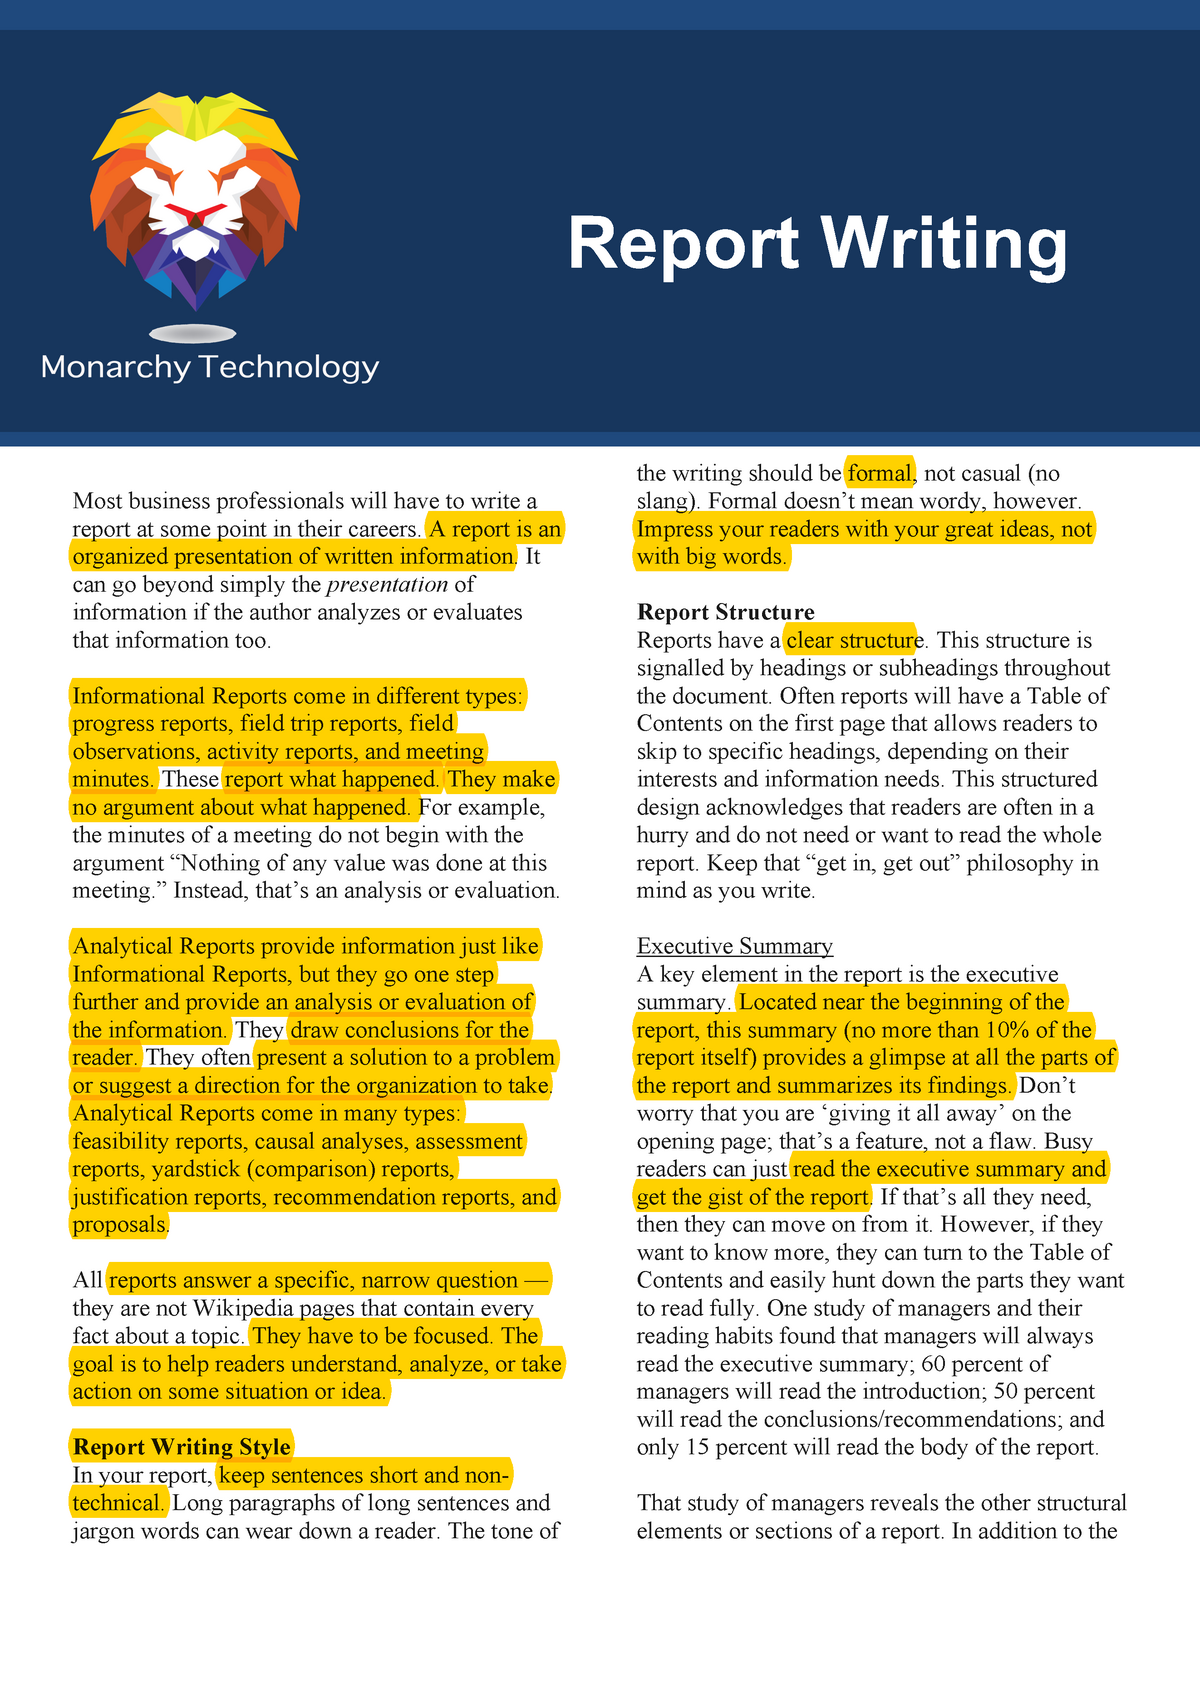 Report Writing - Lecture notes 277 - MGHCO277 - U of T - StuDocu